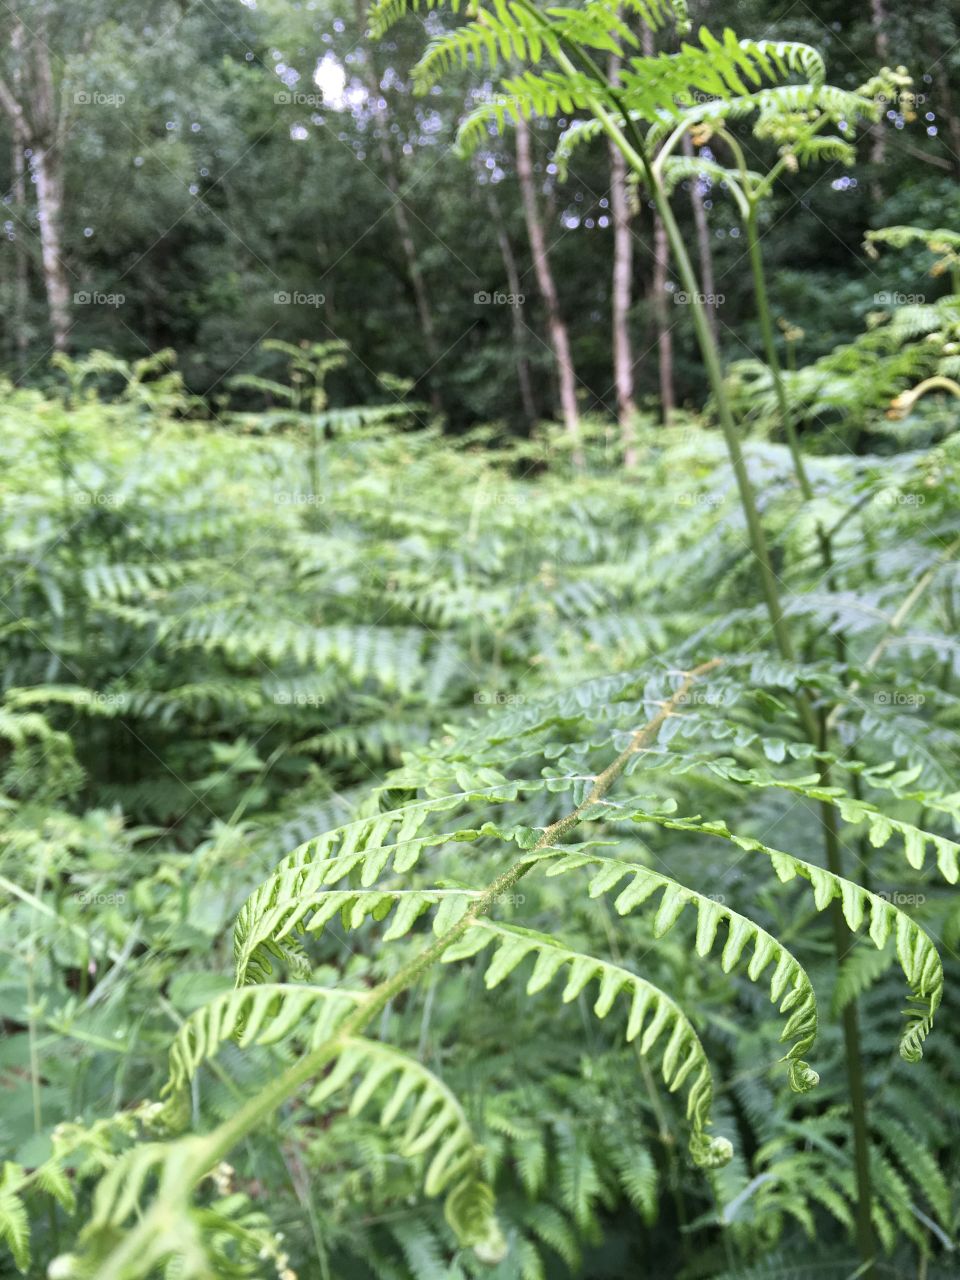 Thicket of ferns in a forest with trees in the background, showing one plant in close up